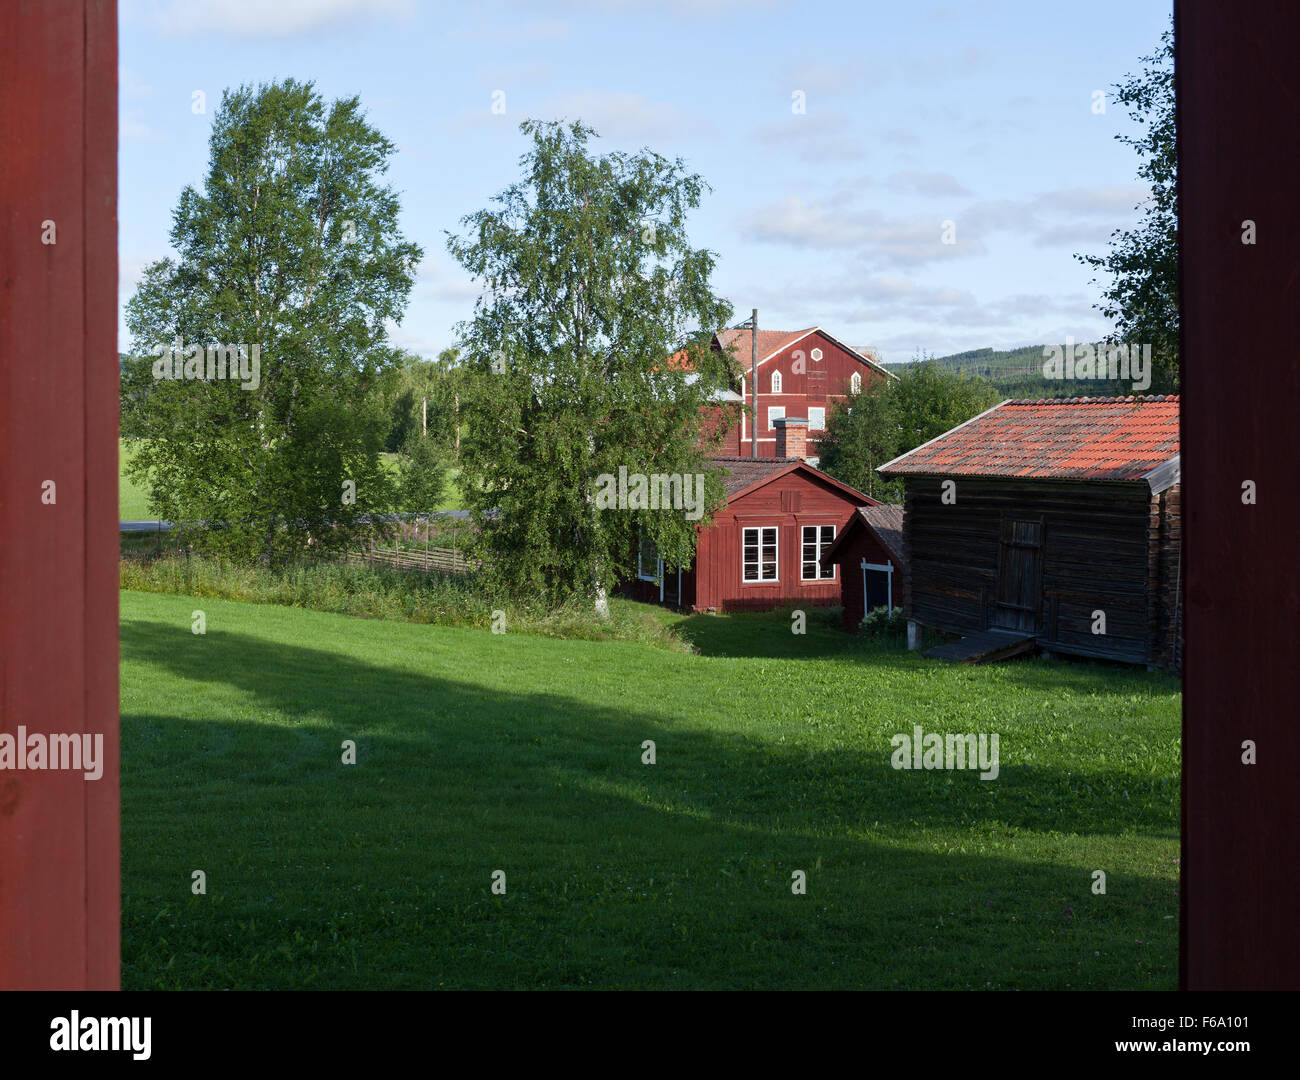 HALSINGLAND, SWEDEN ON JULY 24, 2015. View of a beautiful wooden homestead. Falu Red Paint colors and farmland. Editorial use. Stock Photo